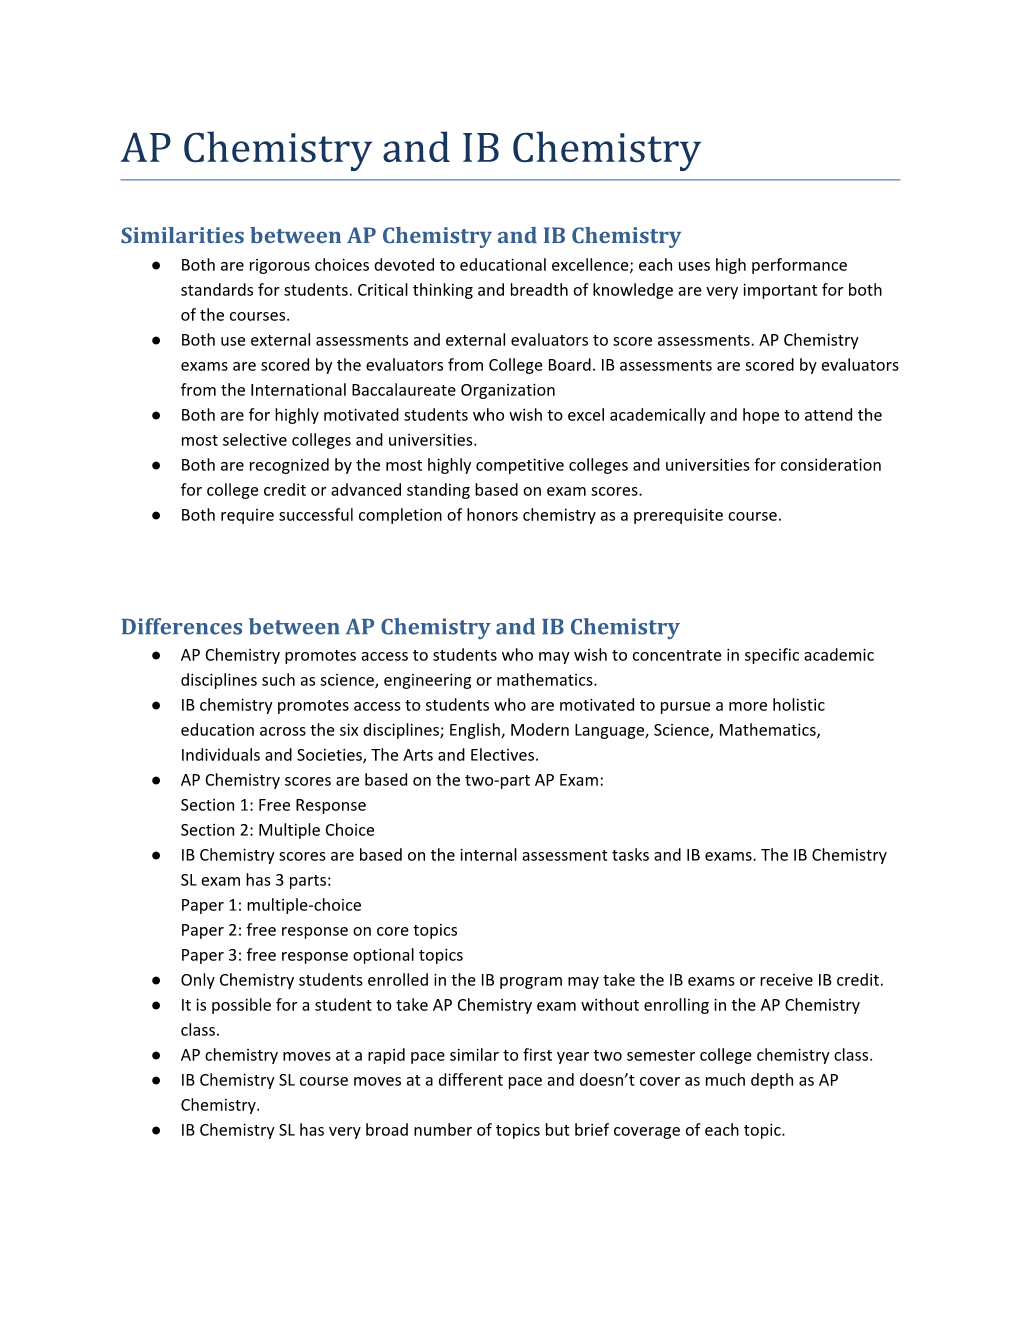 AP and IB Chemistry Similarities and Differences